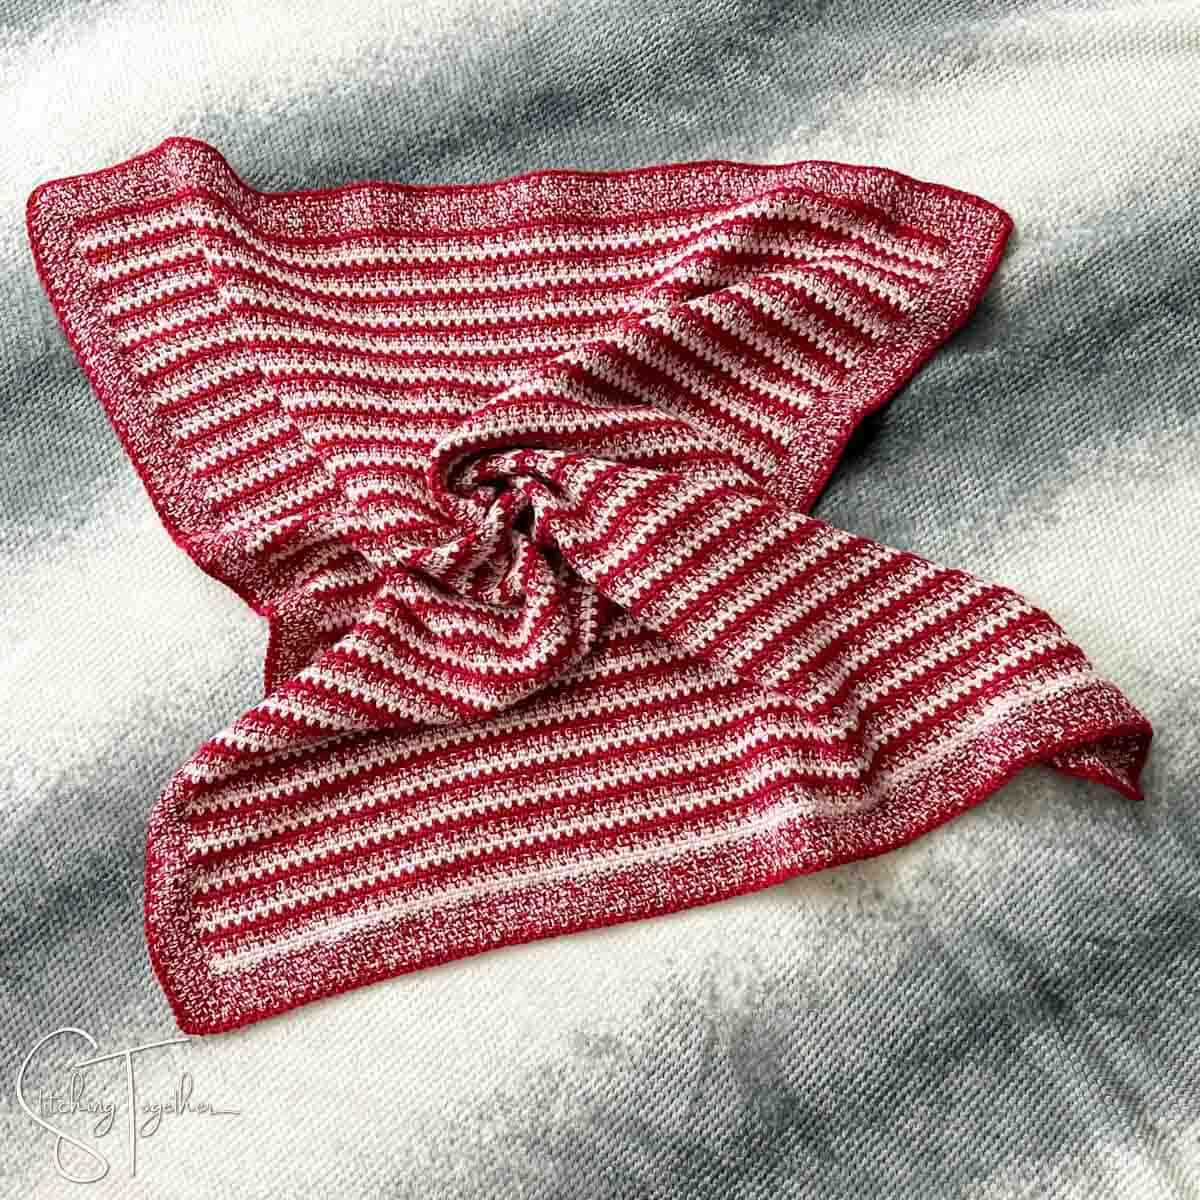 red striped crochet baby blanket slightly crumpled laying on the floor